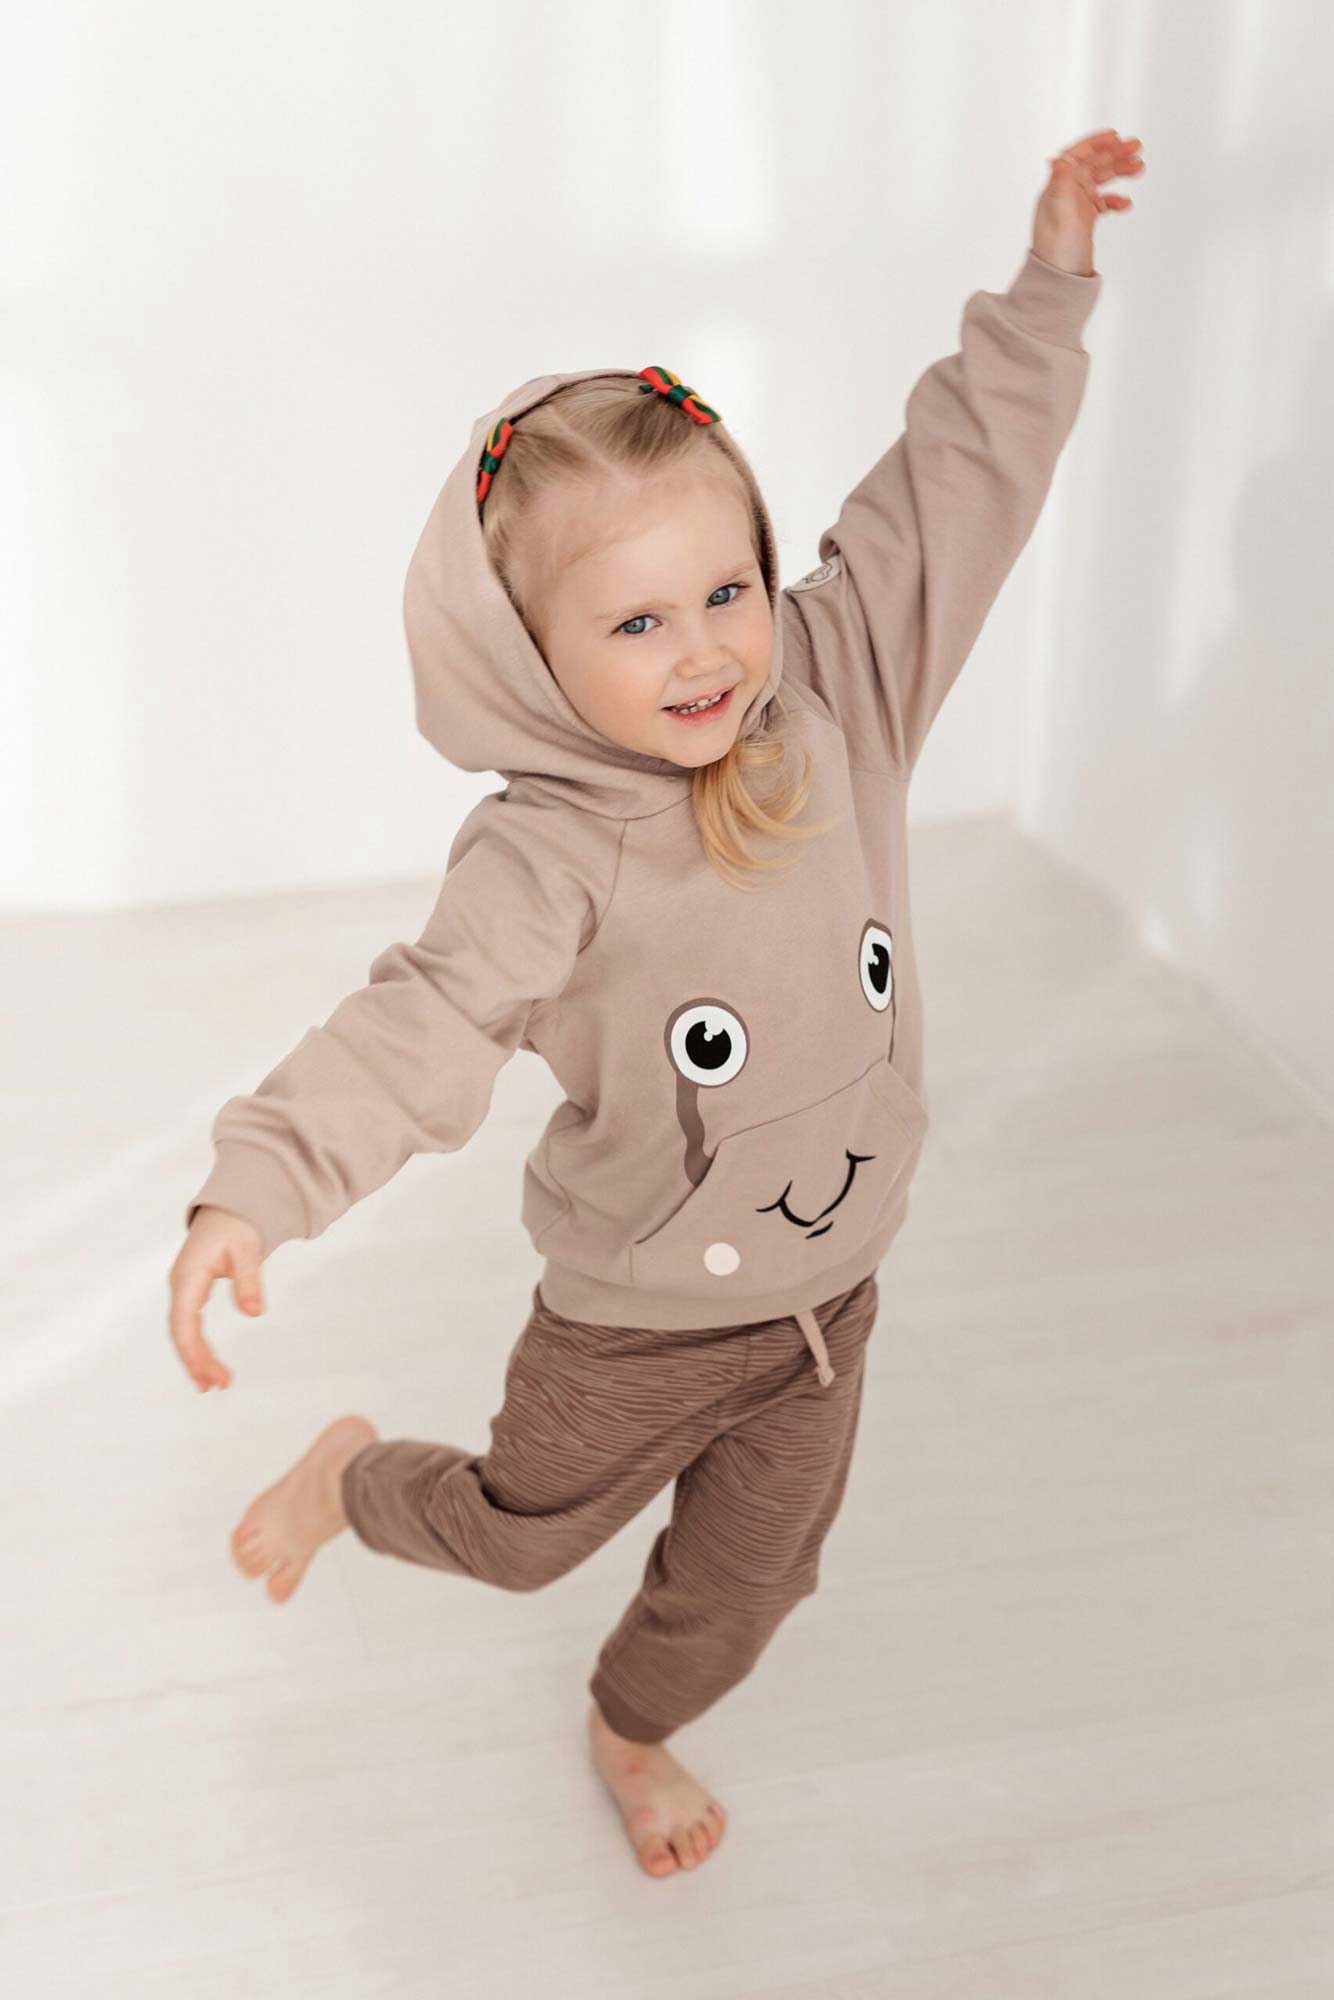 Infant Jumper Snails 286 is super comfy for all day wear and let's your kid enjoy their adventures in style